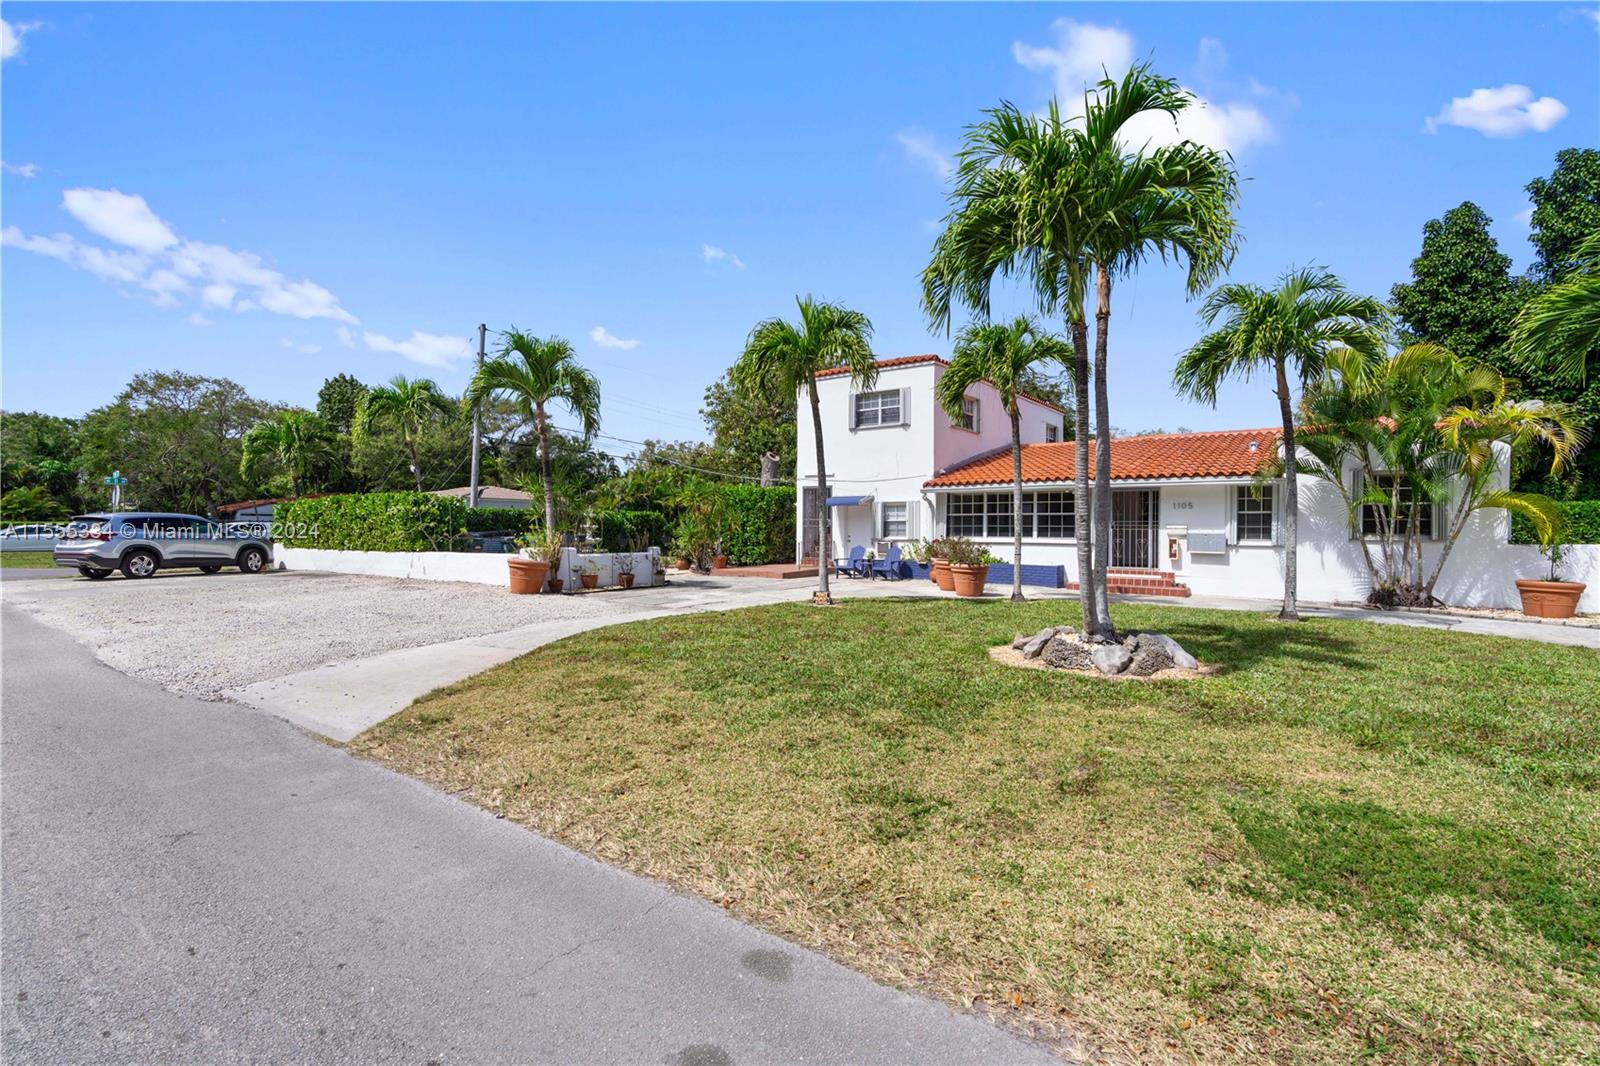 Rental Property at 1105 Ne 119th St St, Biscayne Park, Miami-Dade County, Florida -  - $1,399,999 MO.